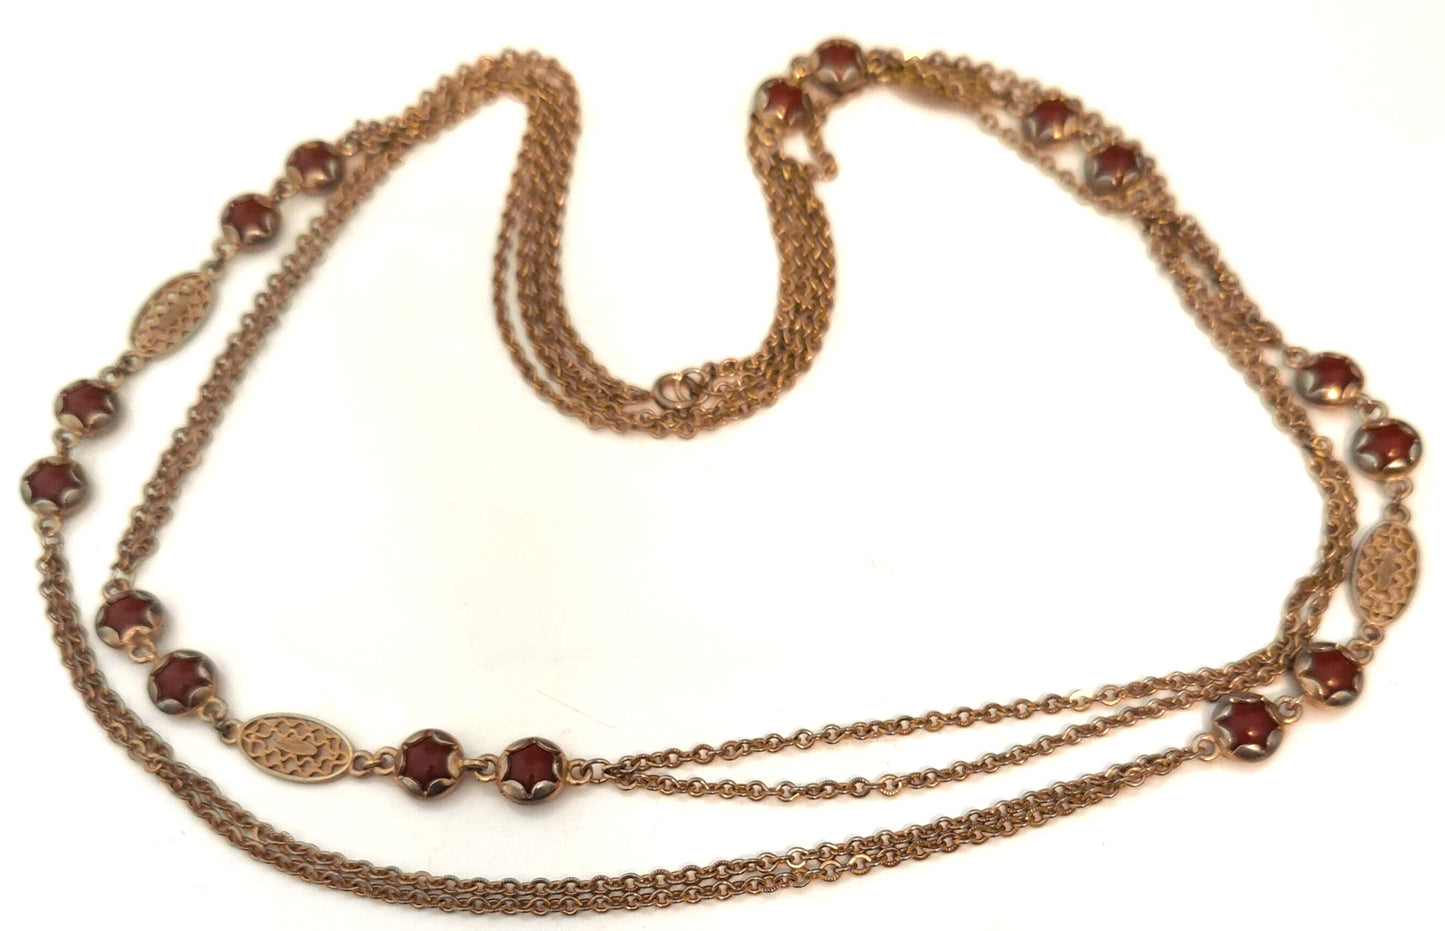 Beautiful Vintage Gold-tone Chain-Link Necklace with Bevel-set Carnelian Stones Attachments.